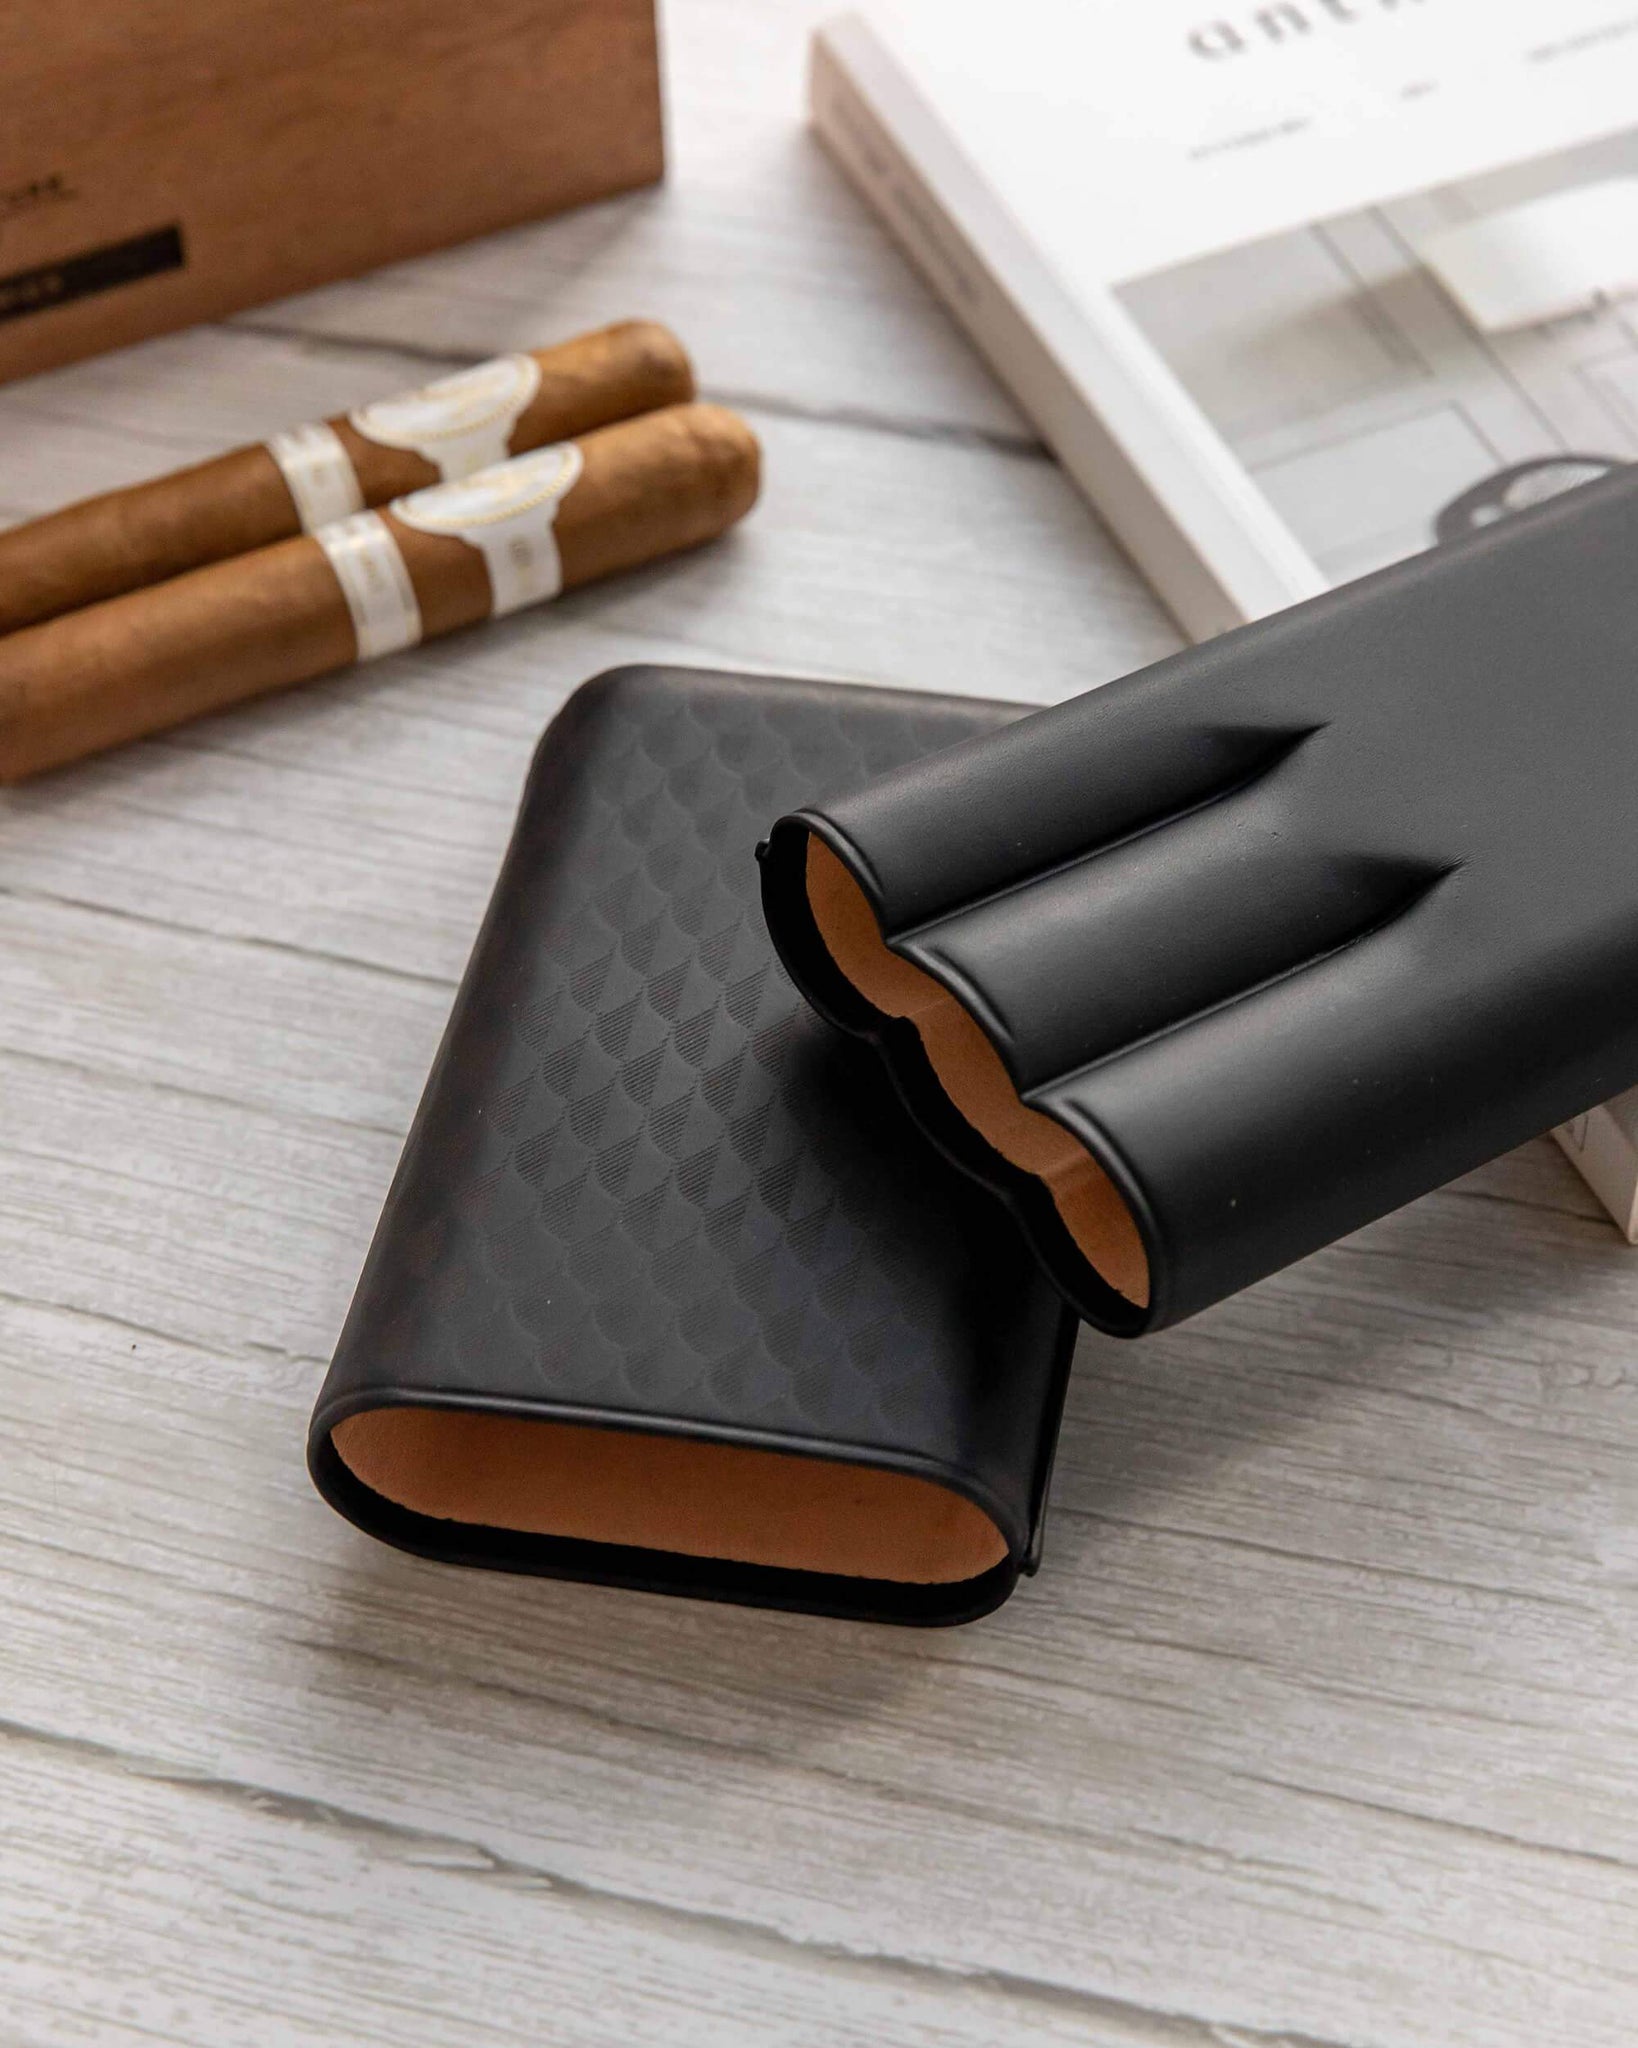 Davidoff Cigar Case XL2 Brown Leather Curing – Lighters Direct